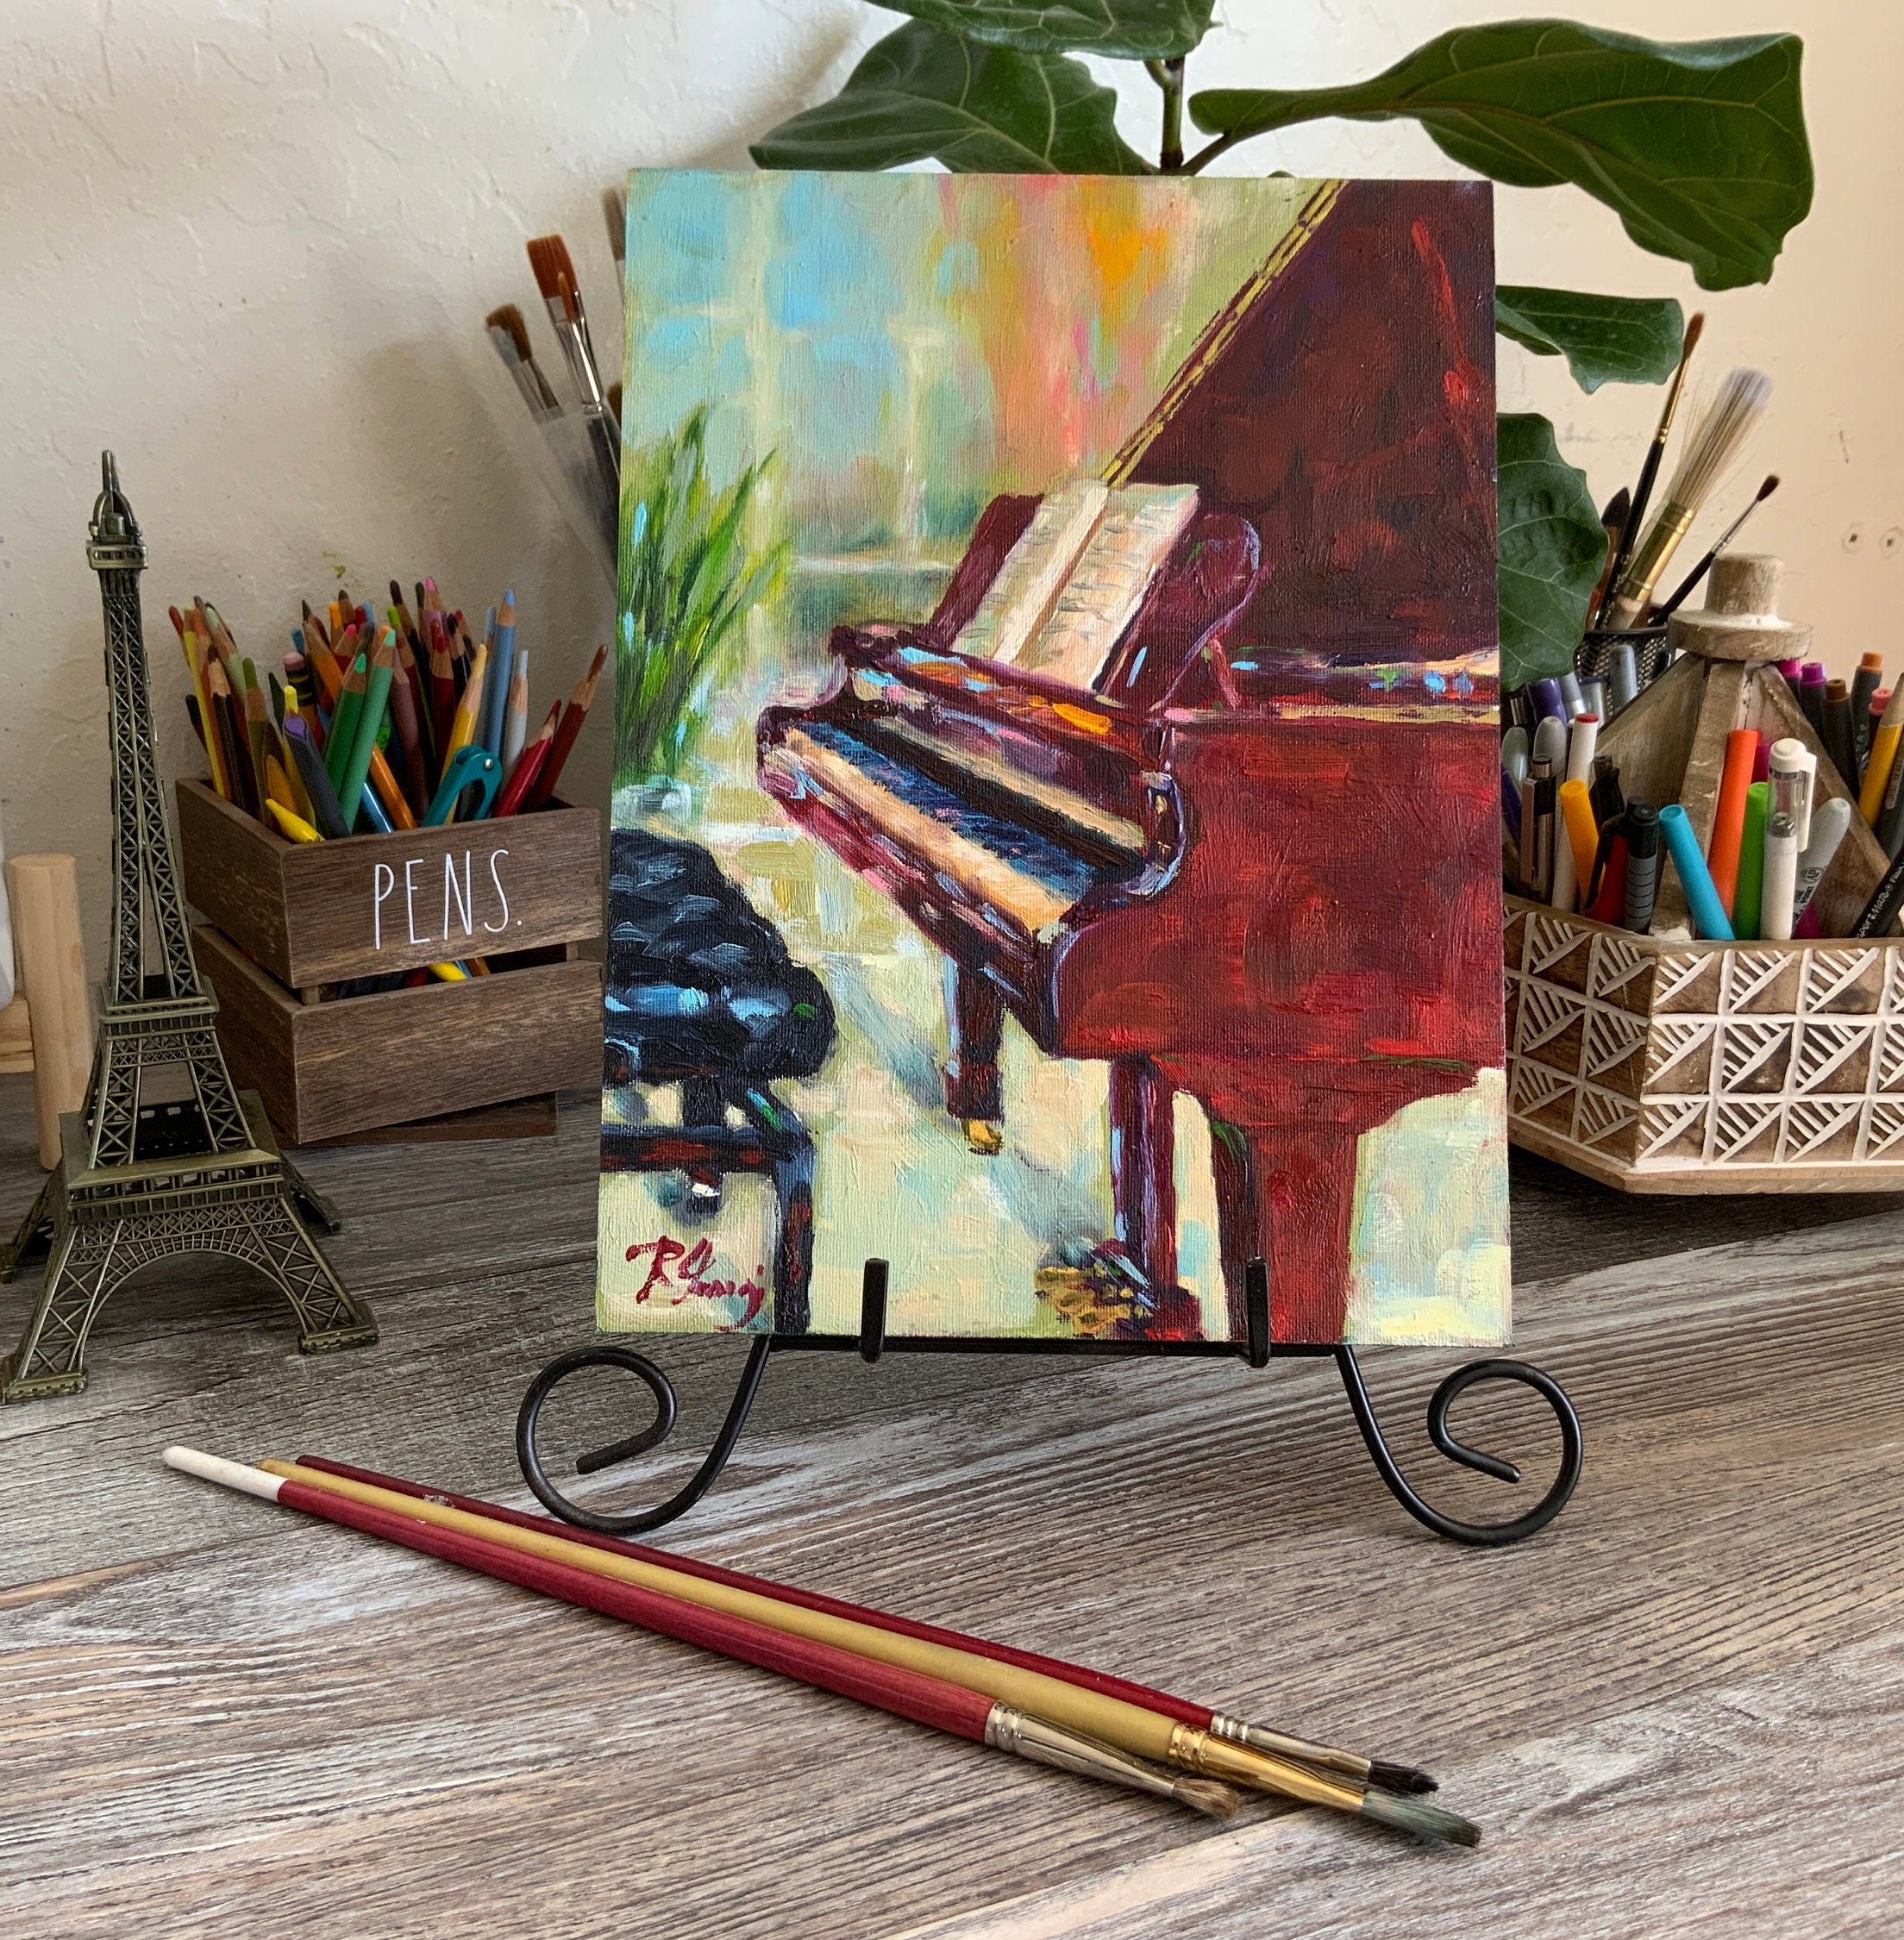 Piano Instrument Watercolor Portrait With Sheet Music Background On Worn Canvas  Tote Bag by Design Turnpike - Fine Art America